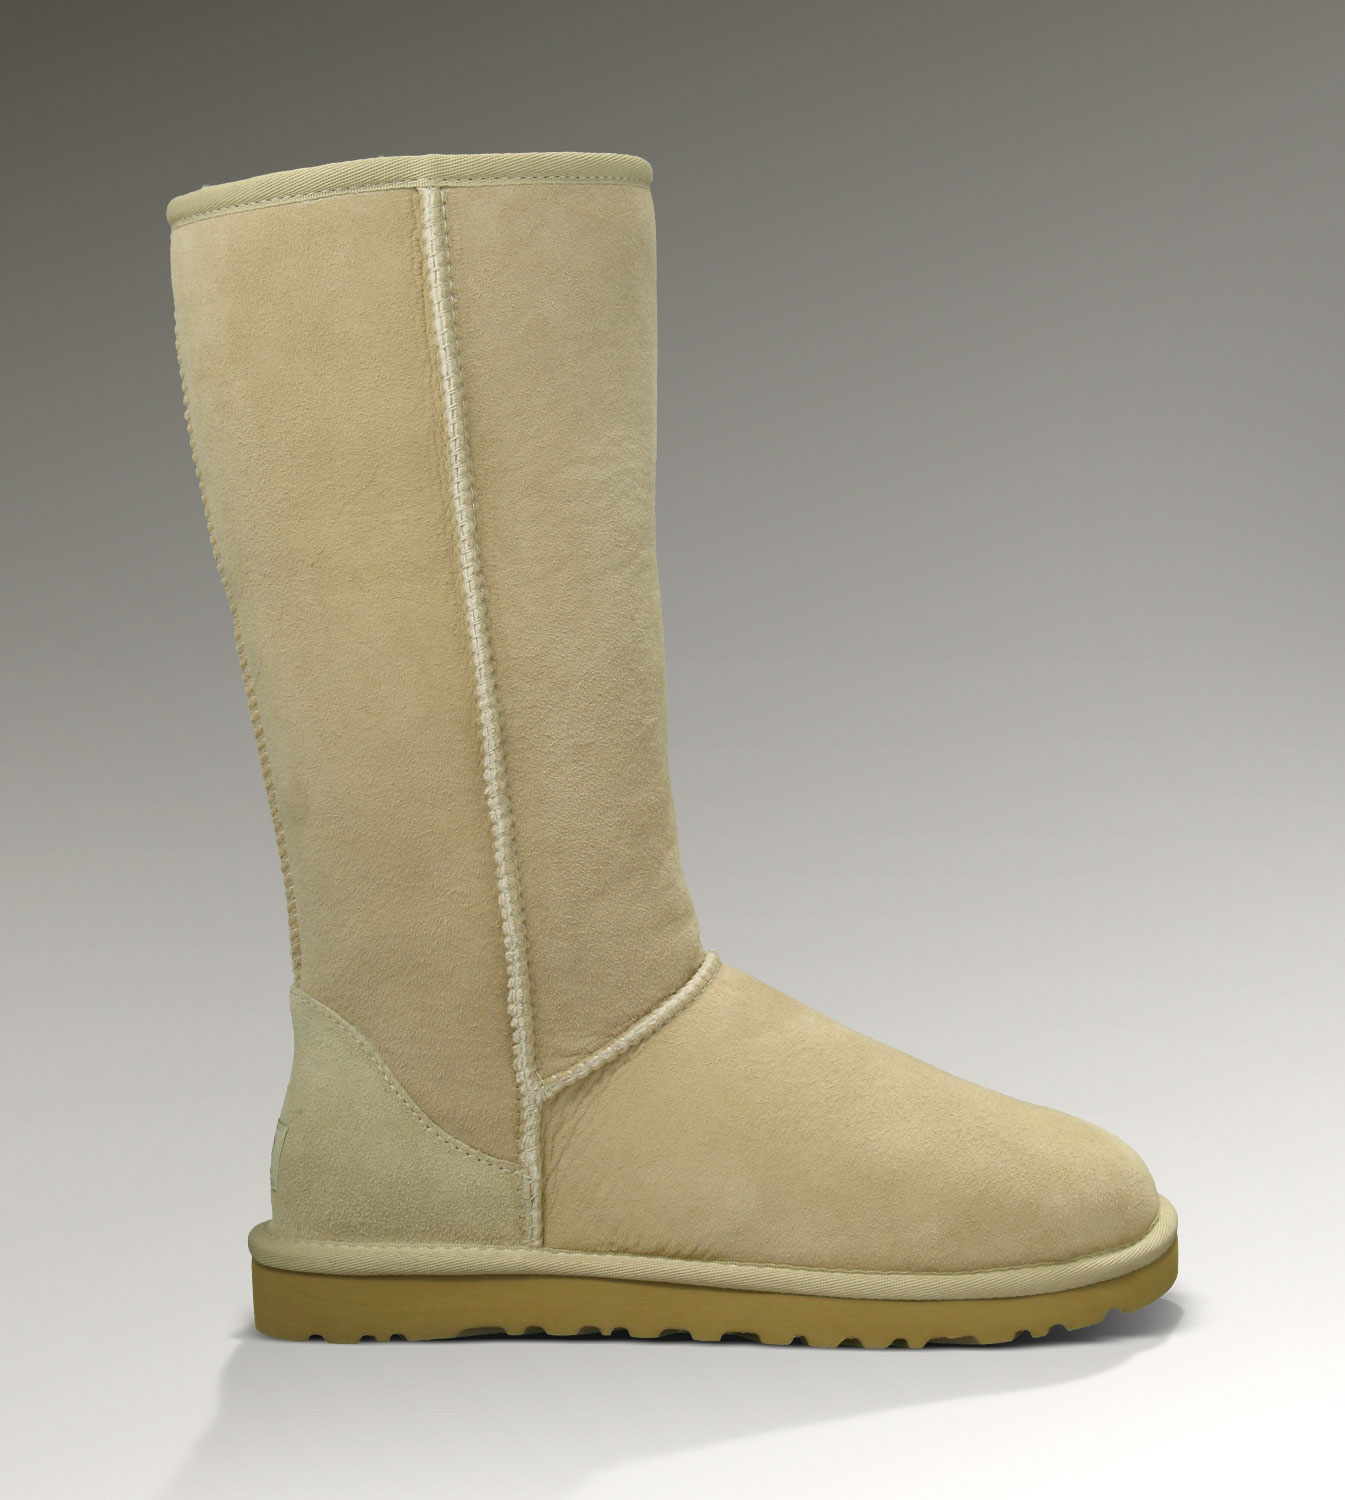 UGG Boots Classic Tall 5815 Sand